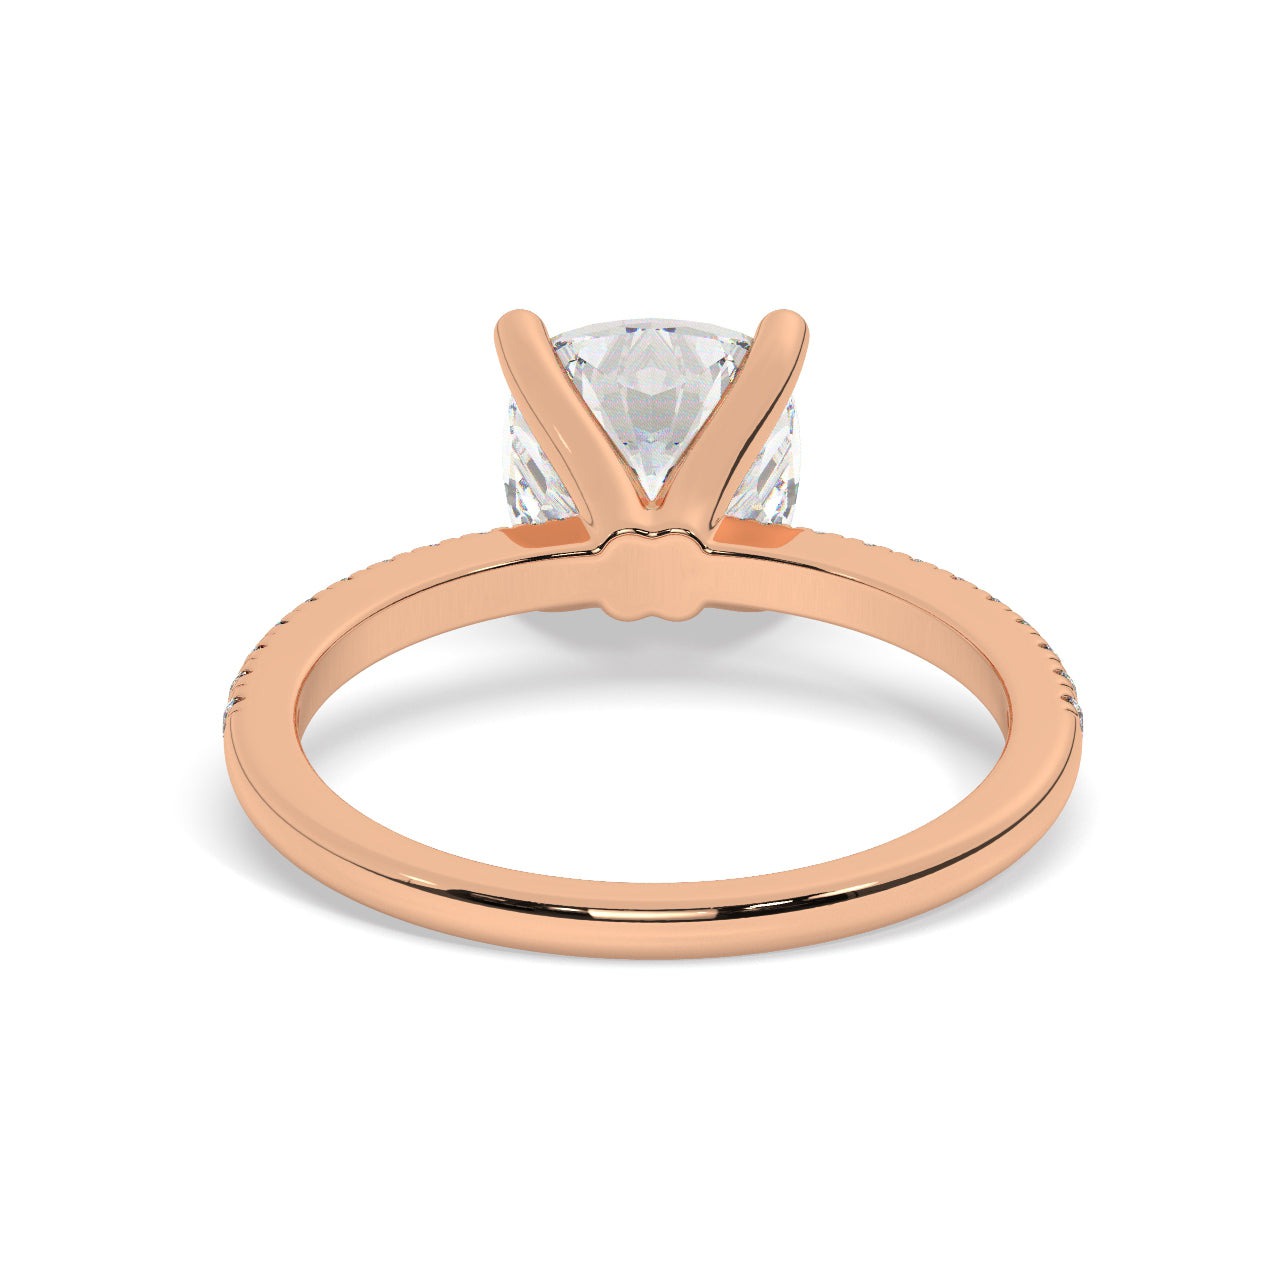 Round Cut Diamond Ring set on a Pavé Band in Rose Gold - Back View